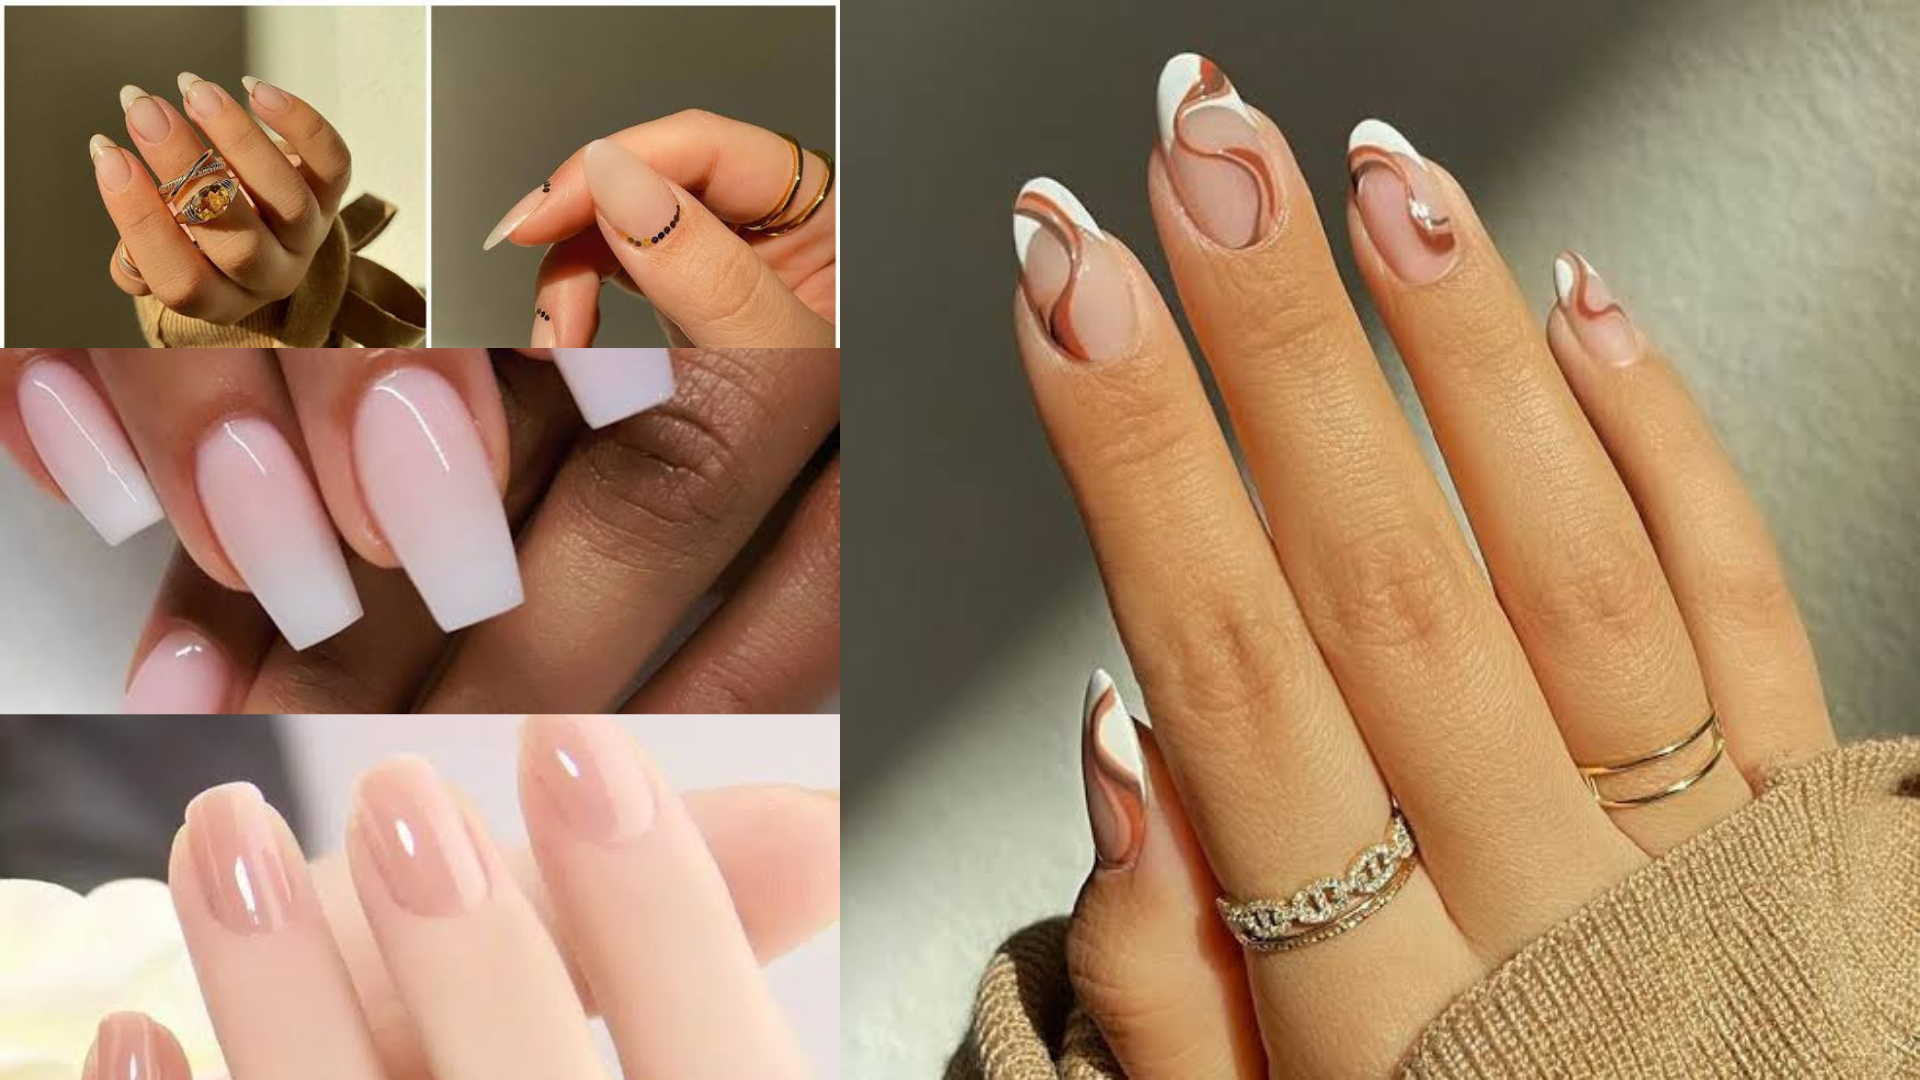 How to Make Your Nails Grow Faster | Grow nails faster, How to grow nails,  Strengthen nails naturally